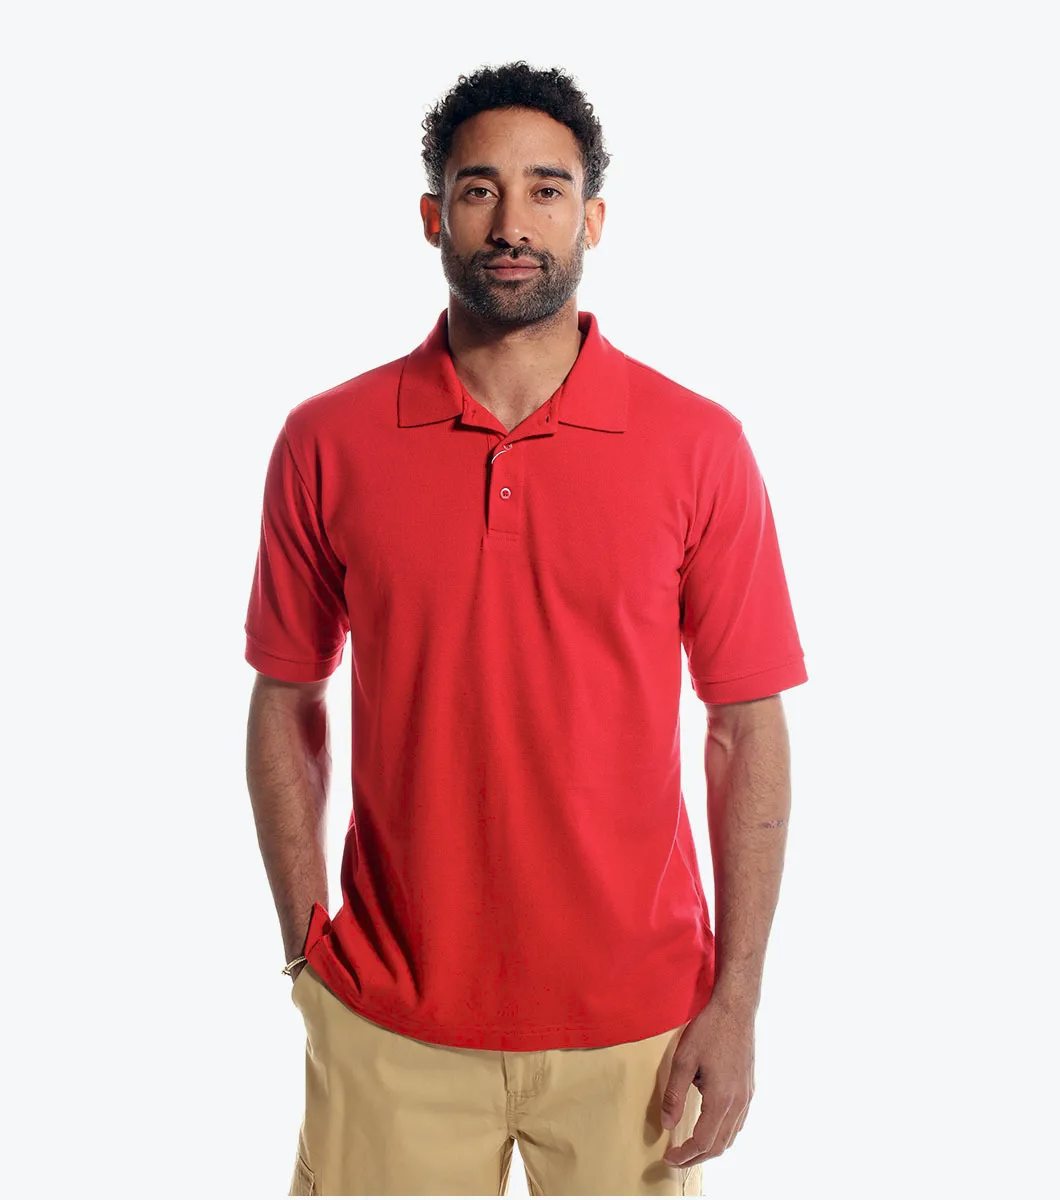 Red Stacy Adams Solid Color Polo Shirts Available in Sizes XL-3X